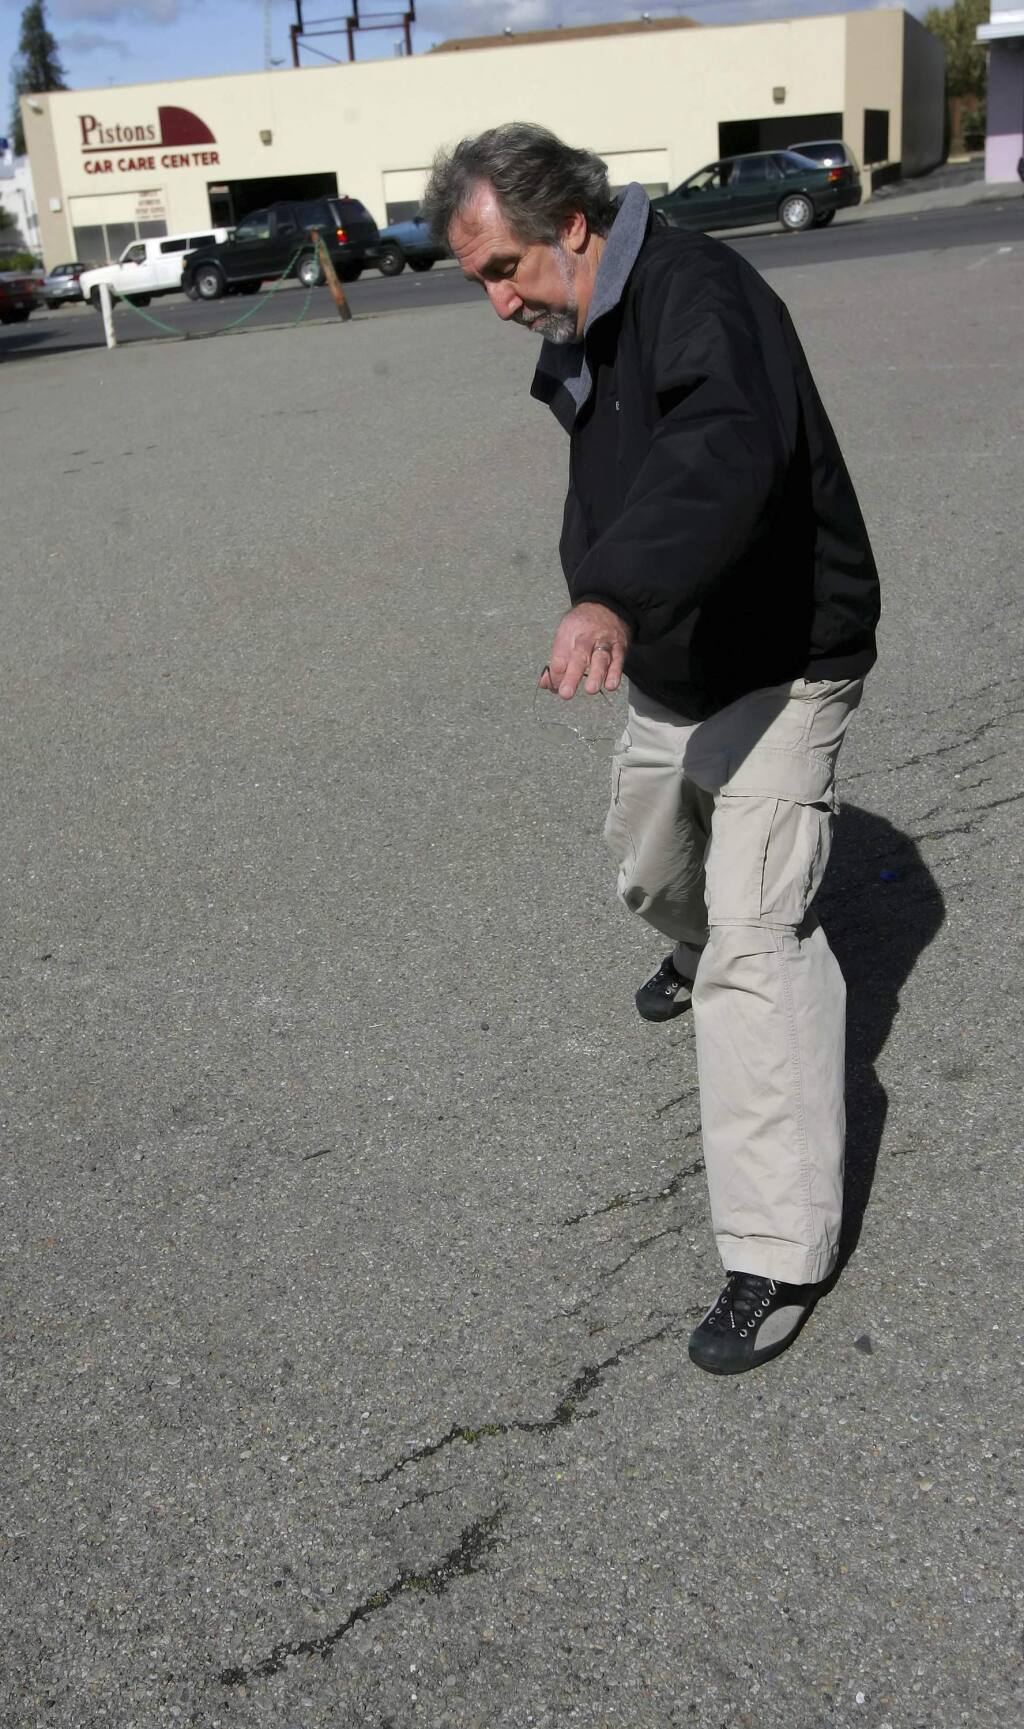 File - In this March 21, 2006, file photo, David Schwartz, geologist for the U.S. Geological Survey (USGS), walks along the Hayward Fault in a parking lot in Hayward, Calif. New research published in the journal Science Advances on Wednesday, Oct. 19, 2016, found that the Hayward Fault may be linked to another fault. (AP Photo/Jeff Chiu, File)